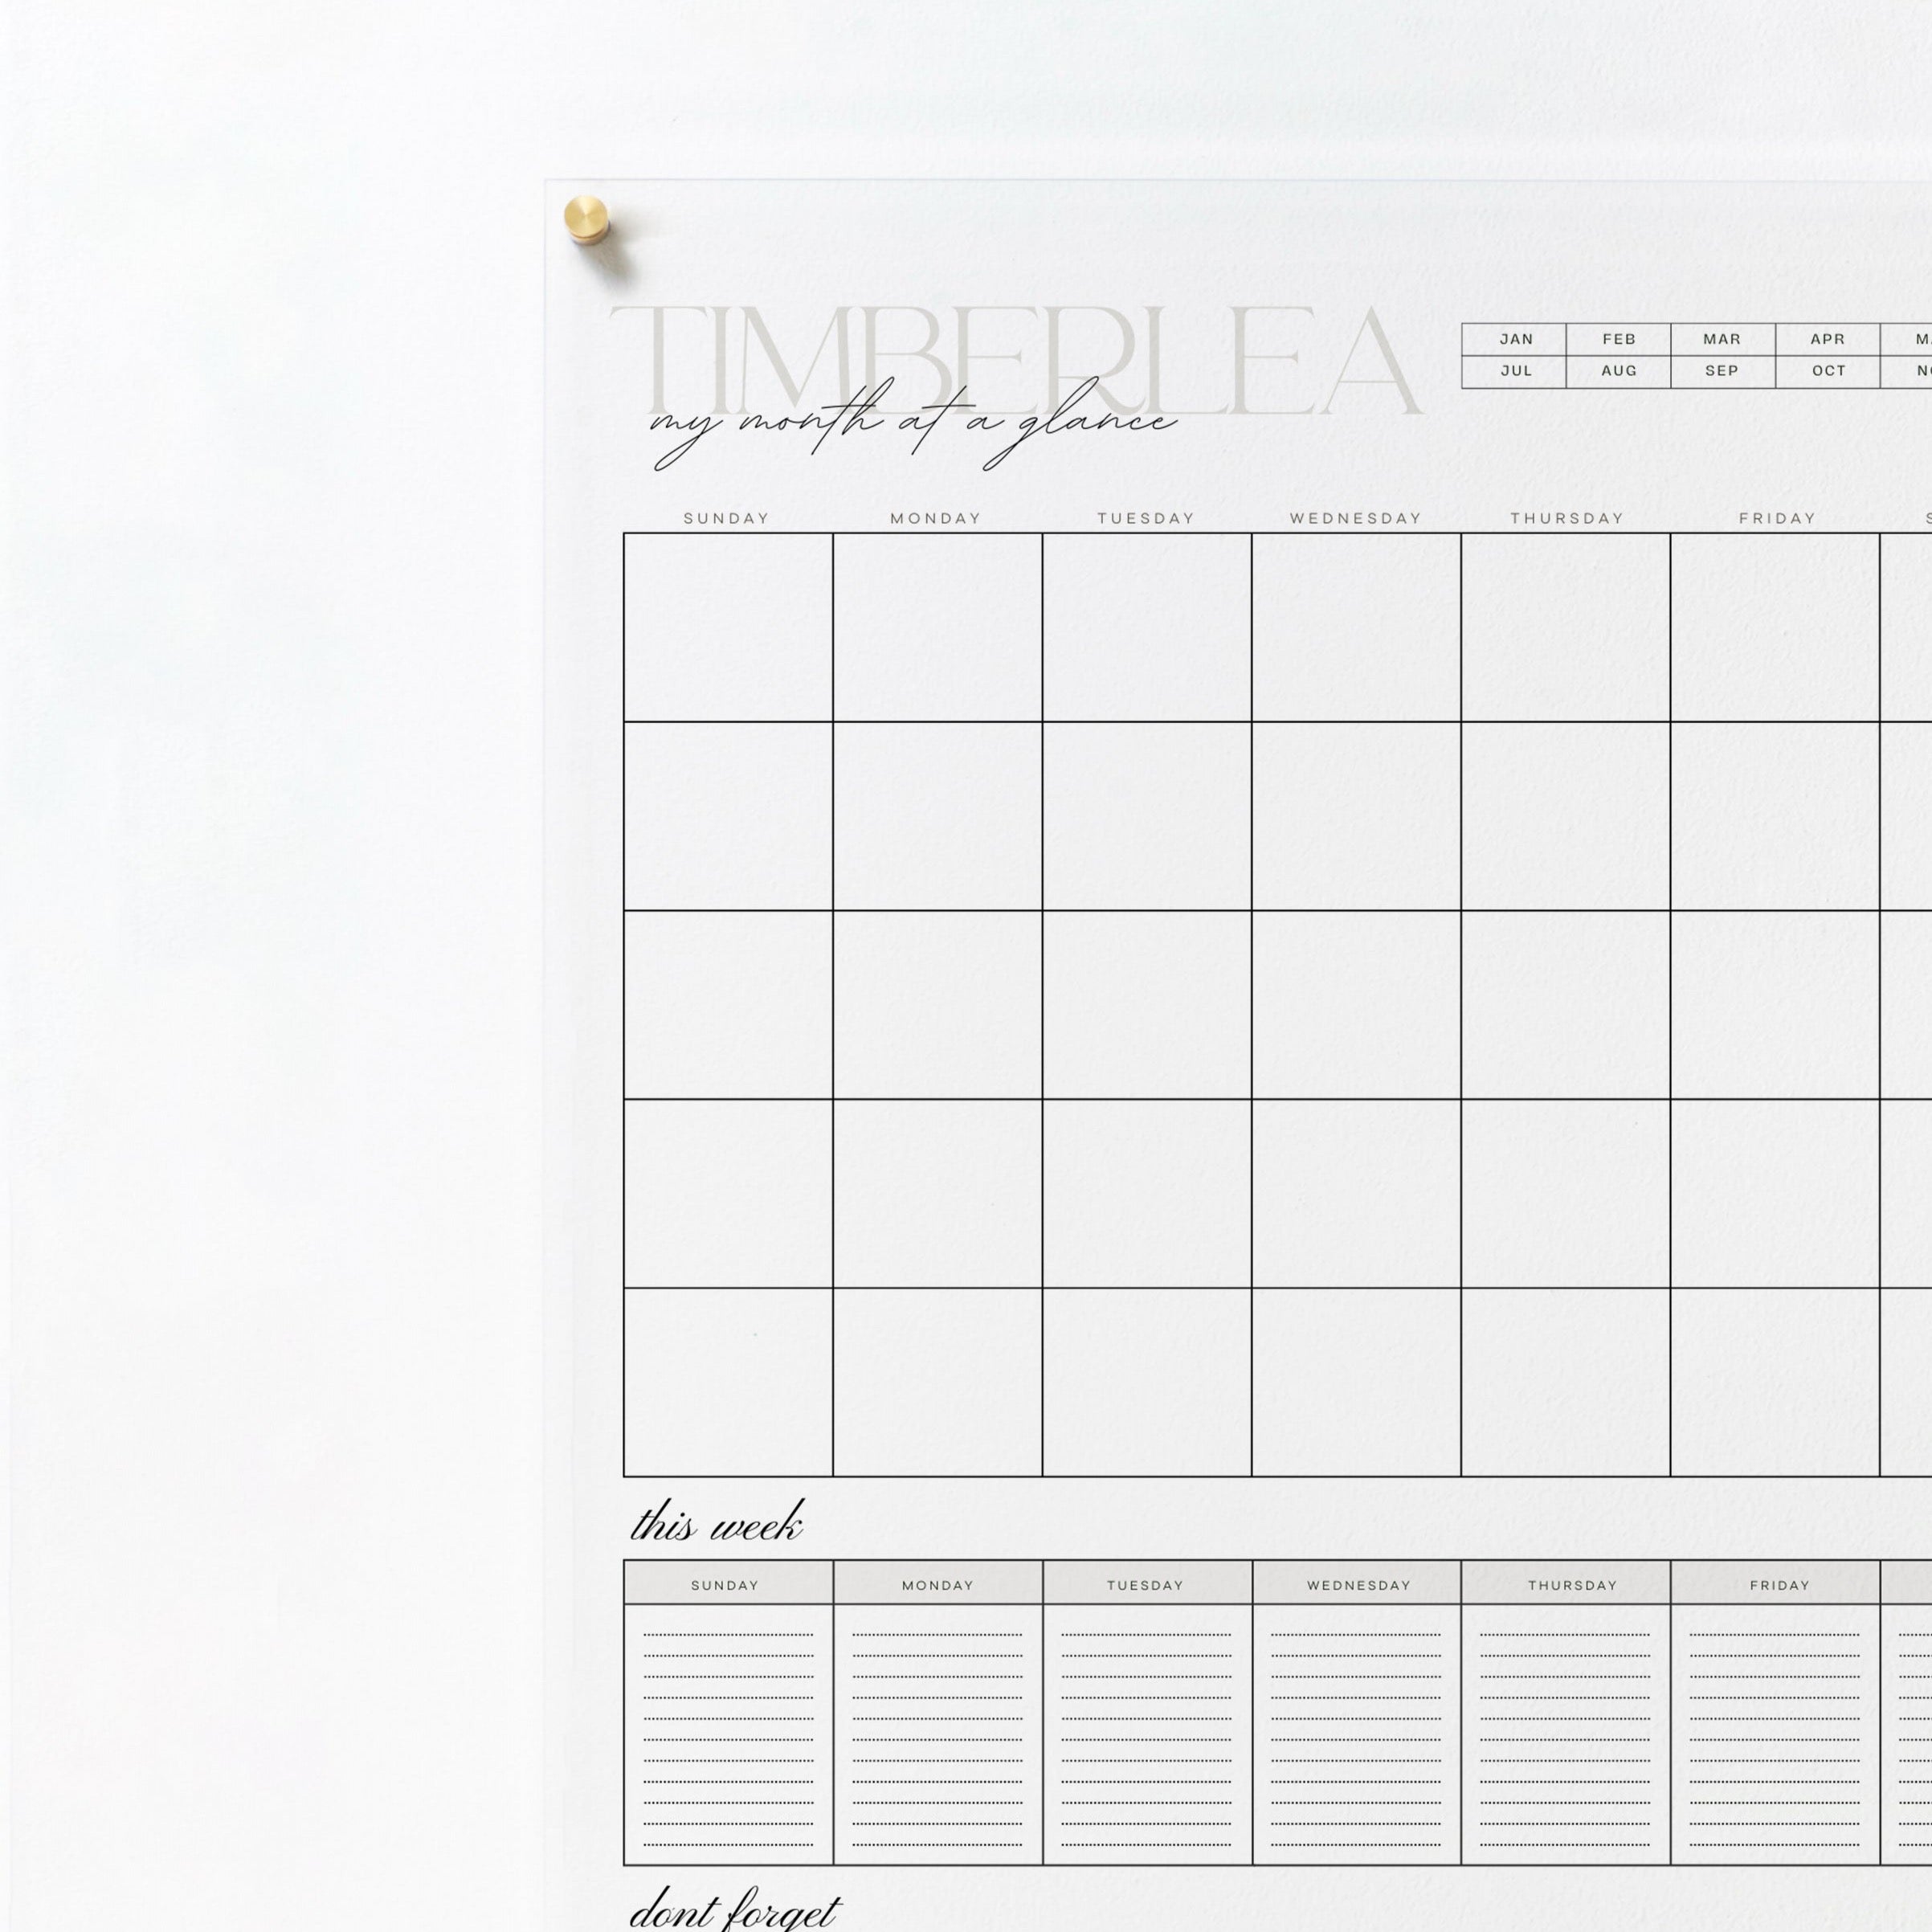 A close-up view of the top left corner of the same acrylic board, showing the calendar's heading and the beginning of the monthly grid. The board is mounted on a wall with a gold pin.